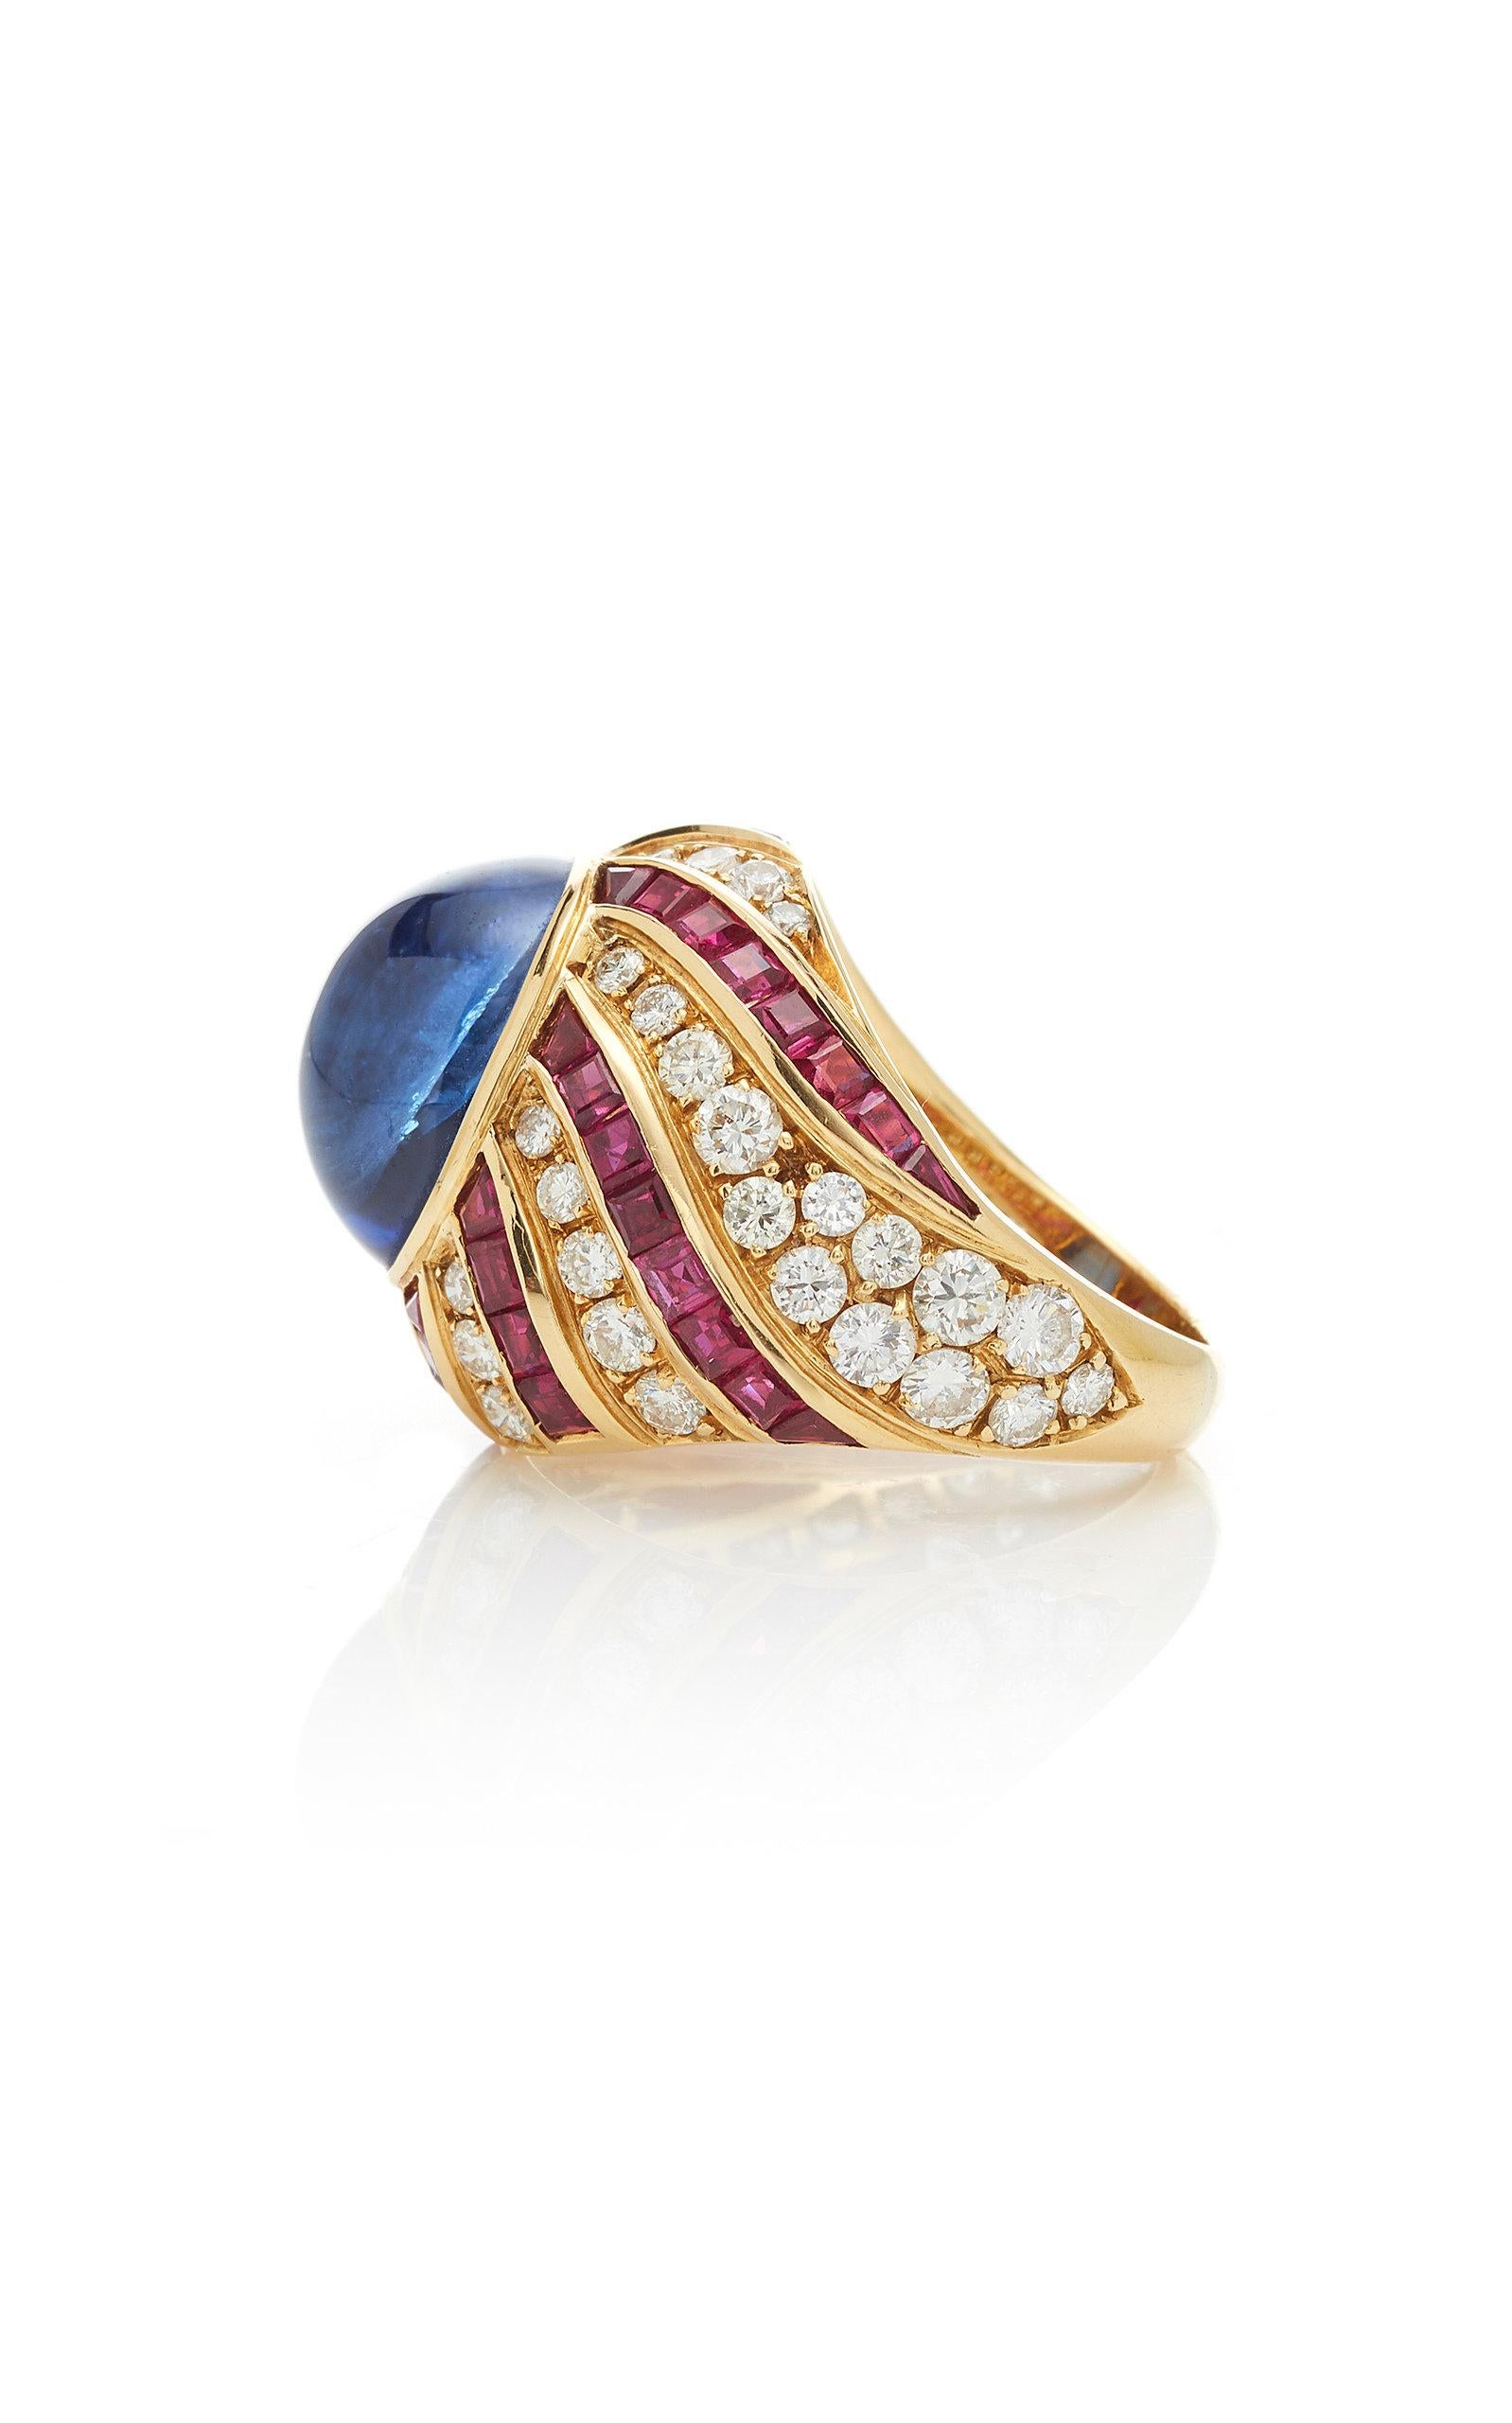 A beautiful ring of vortex design in 18kt yellow gold showcasing a cabochon ceylon sapphire (8 cts), square cut rubies and brilliant cut diamonds. Made in Italy by historical Northern Italian jeweler Illario, circa 1975.